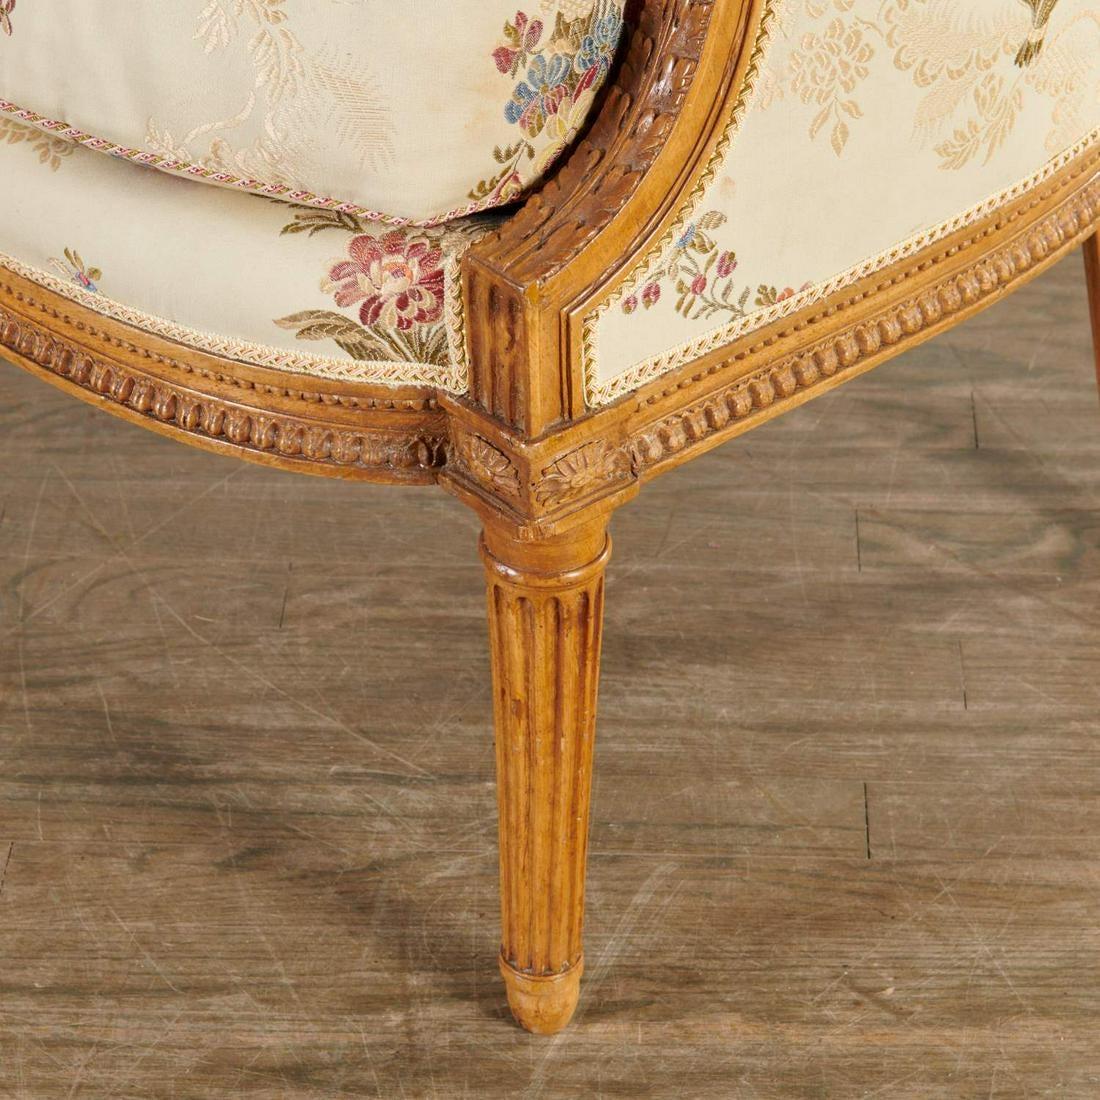 A fine Louis XVI period bergère in beech by French menuisier Sulpice Brizard, born 1735, master 1760, stamped under seat rail. Carved with acanthus leaves, beading, paterae, and fluting on the legs, the chair is an excellent example of the highest